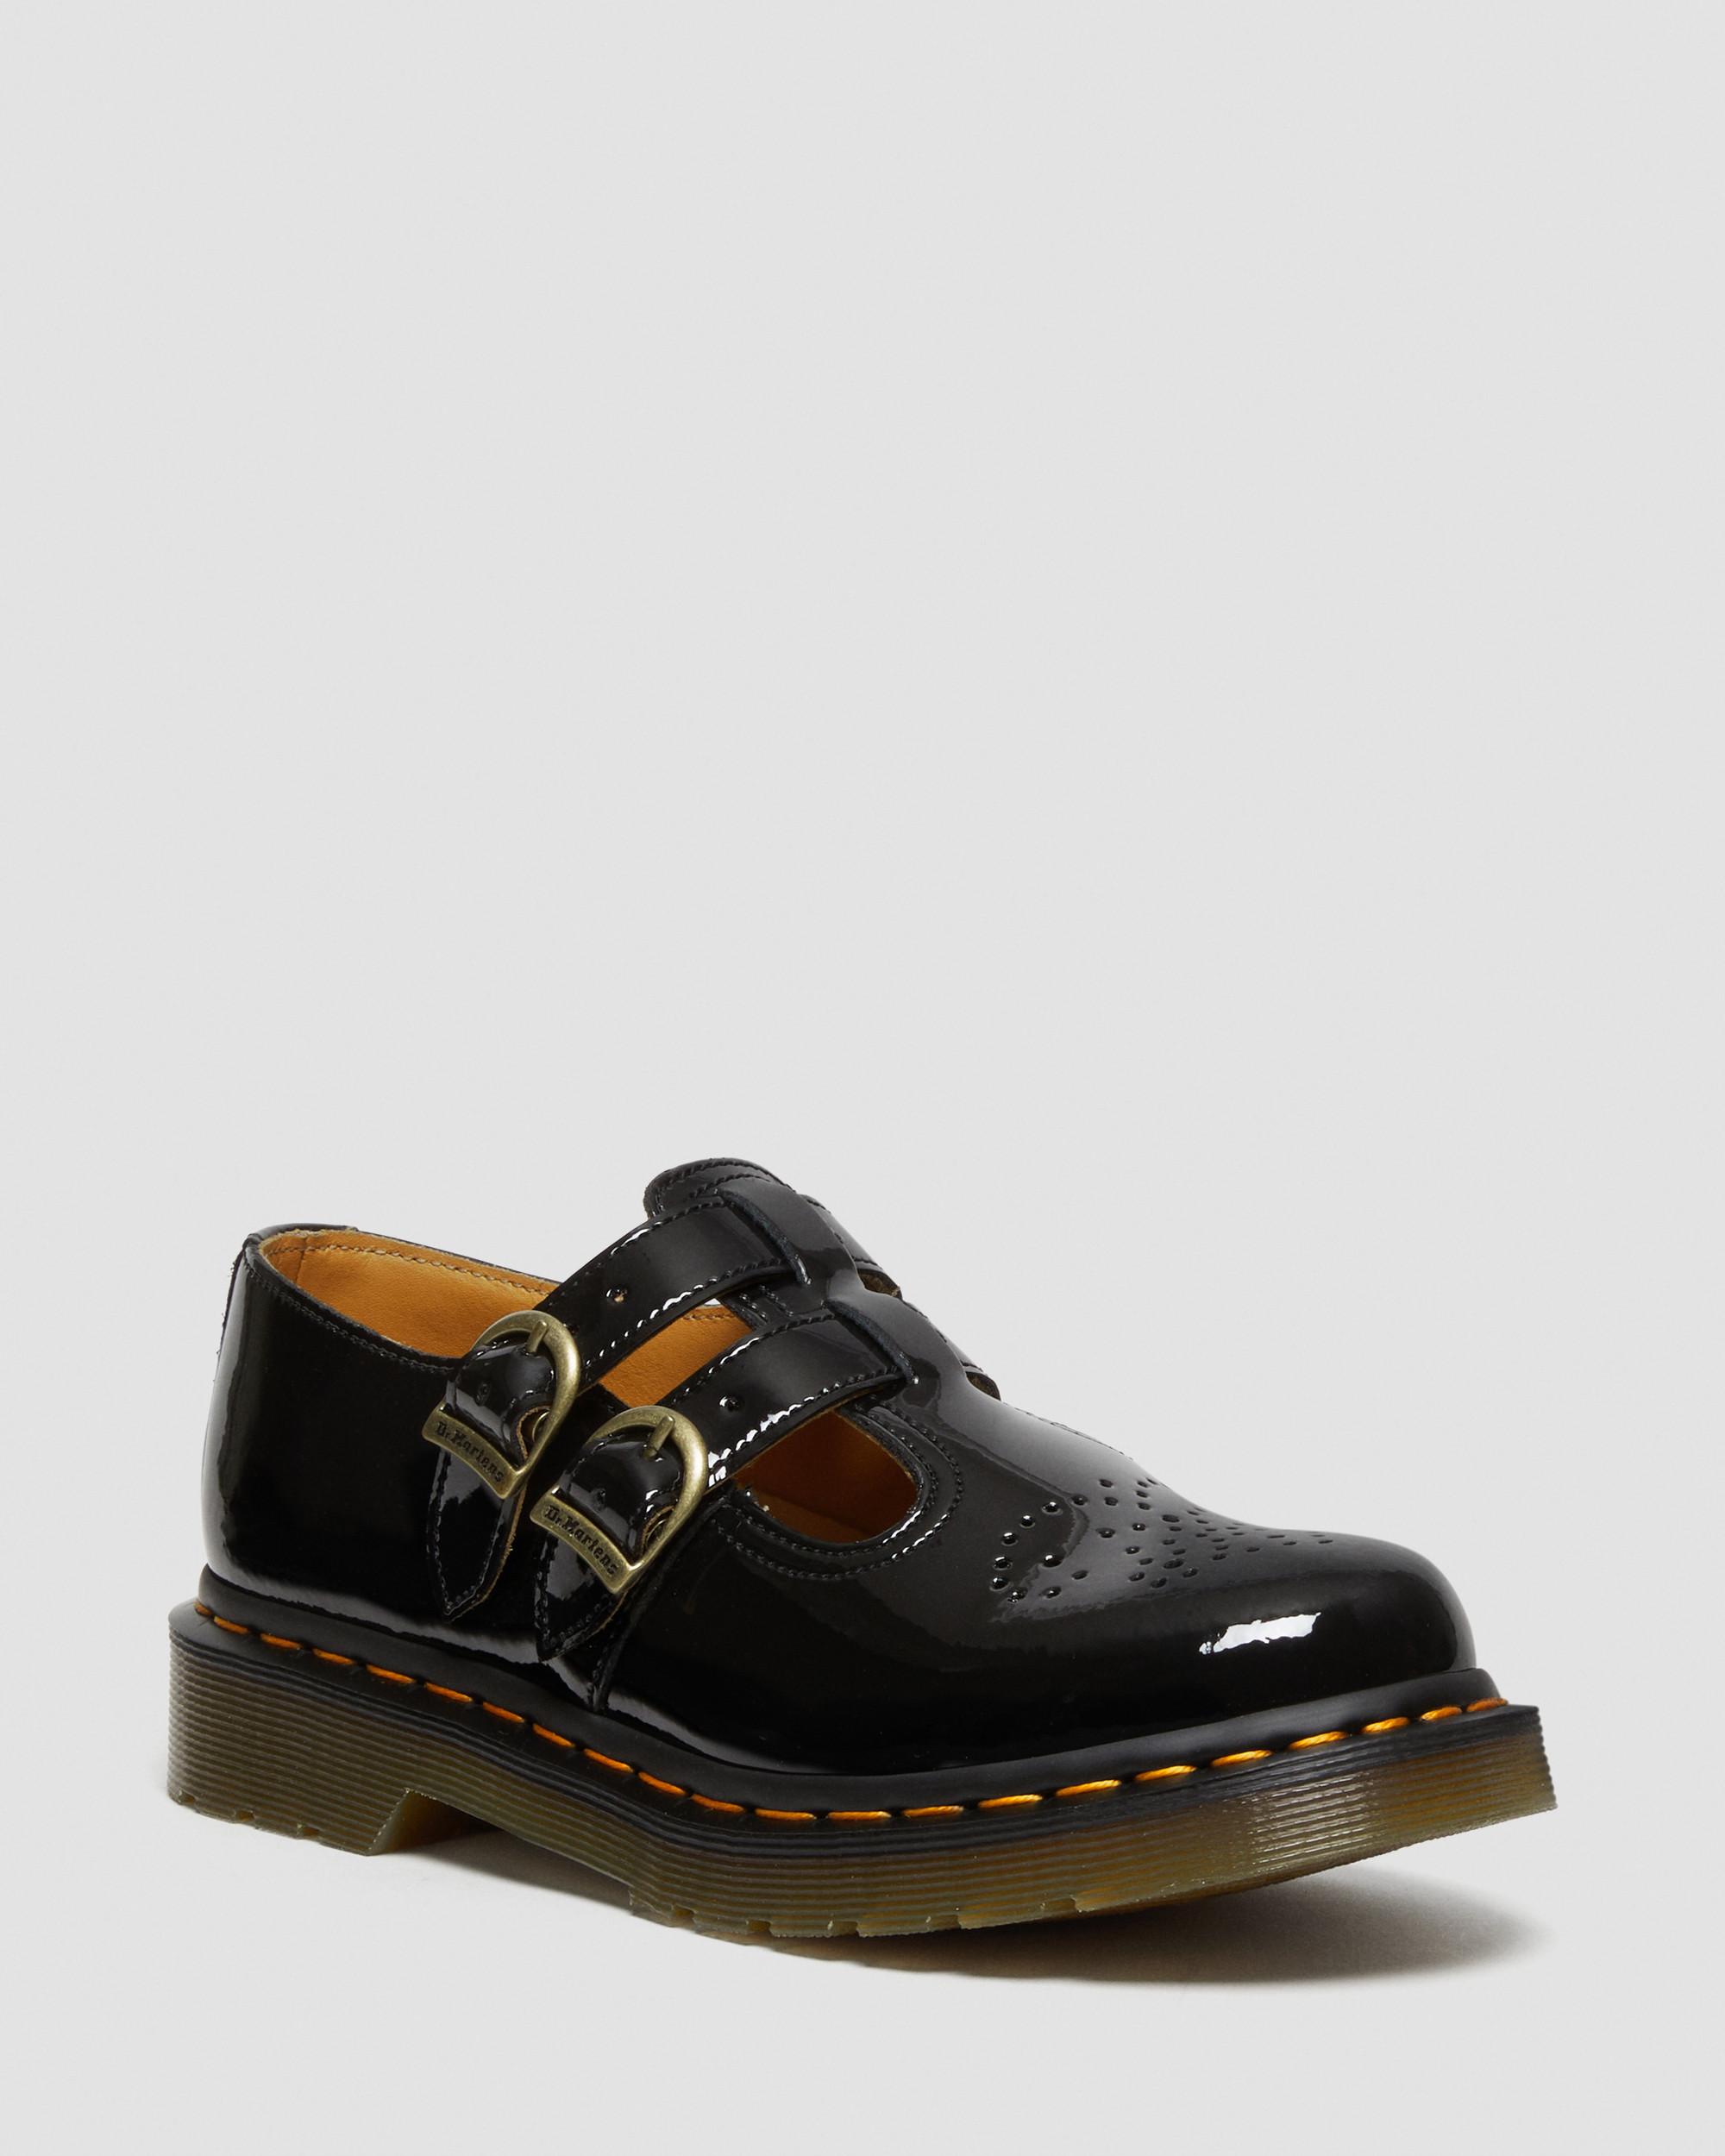 Mary Jane Shoes | Dr. Martens